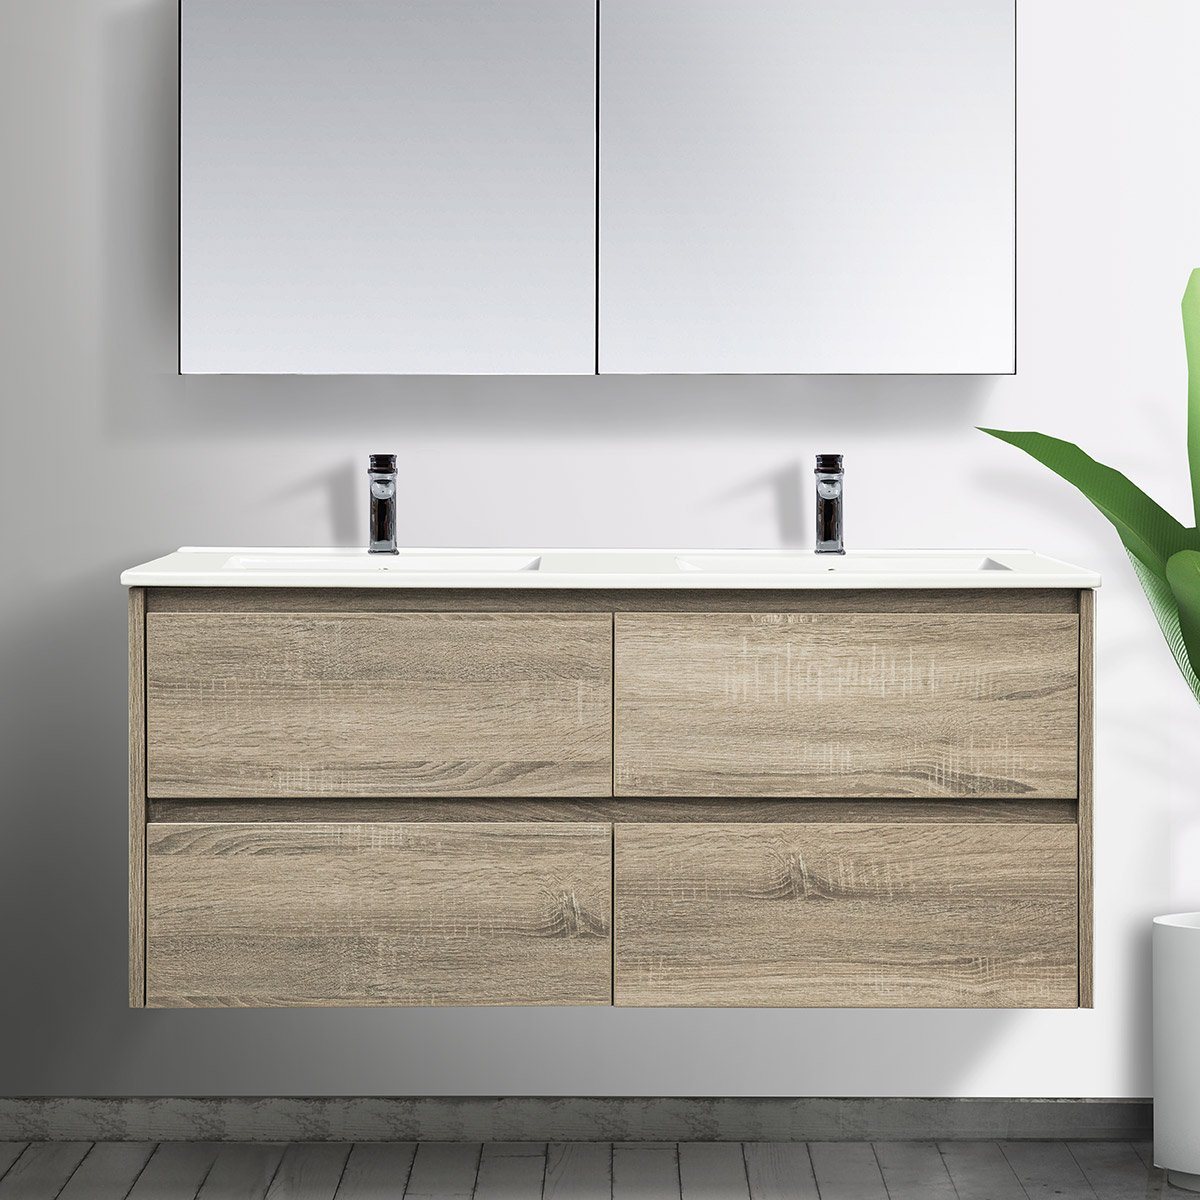 KRIS 120cm Oak Timber Wall Hung Double Vanity Vanities & Mirrors Arova BLISS Speckled Stone Top 2 x CB1108N-Round Gloss White Basin 